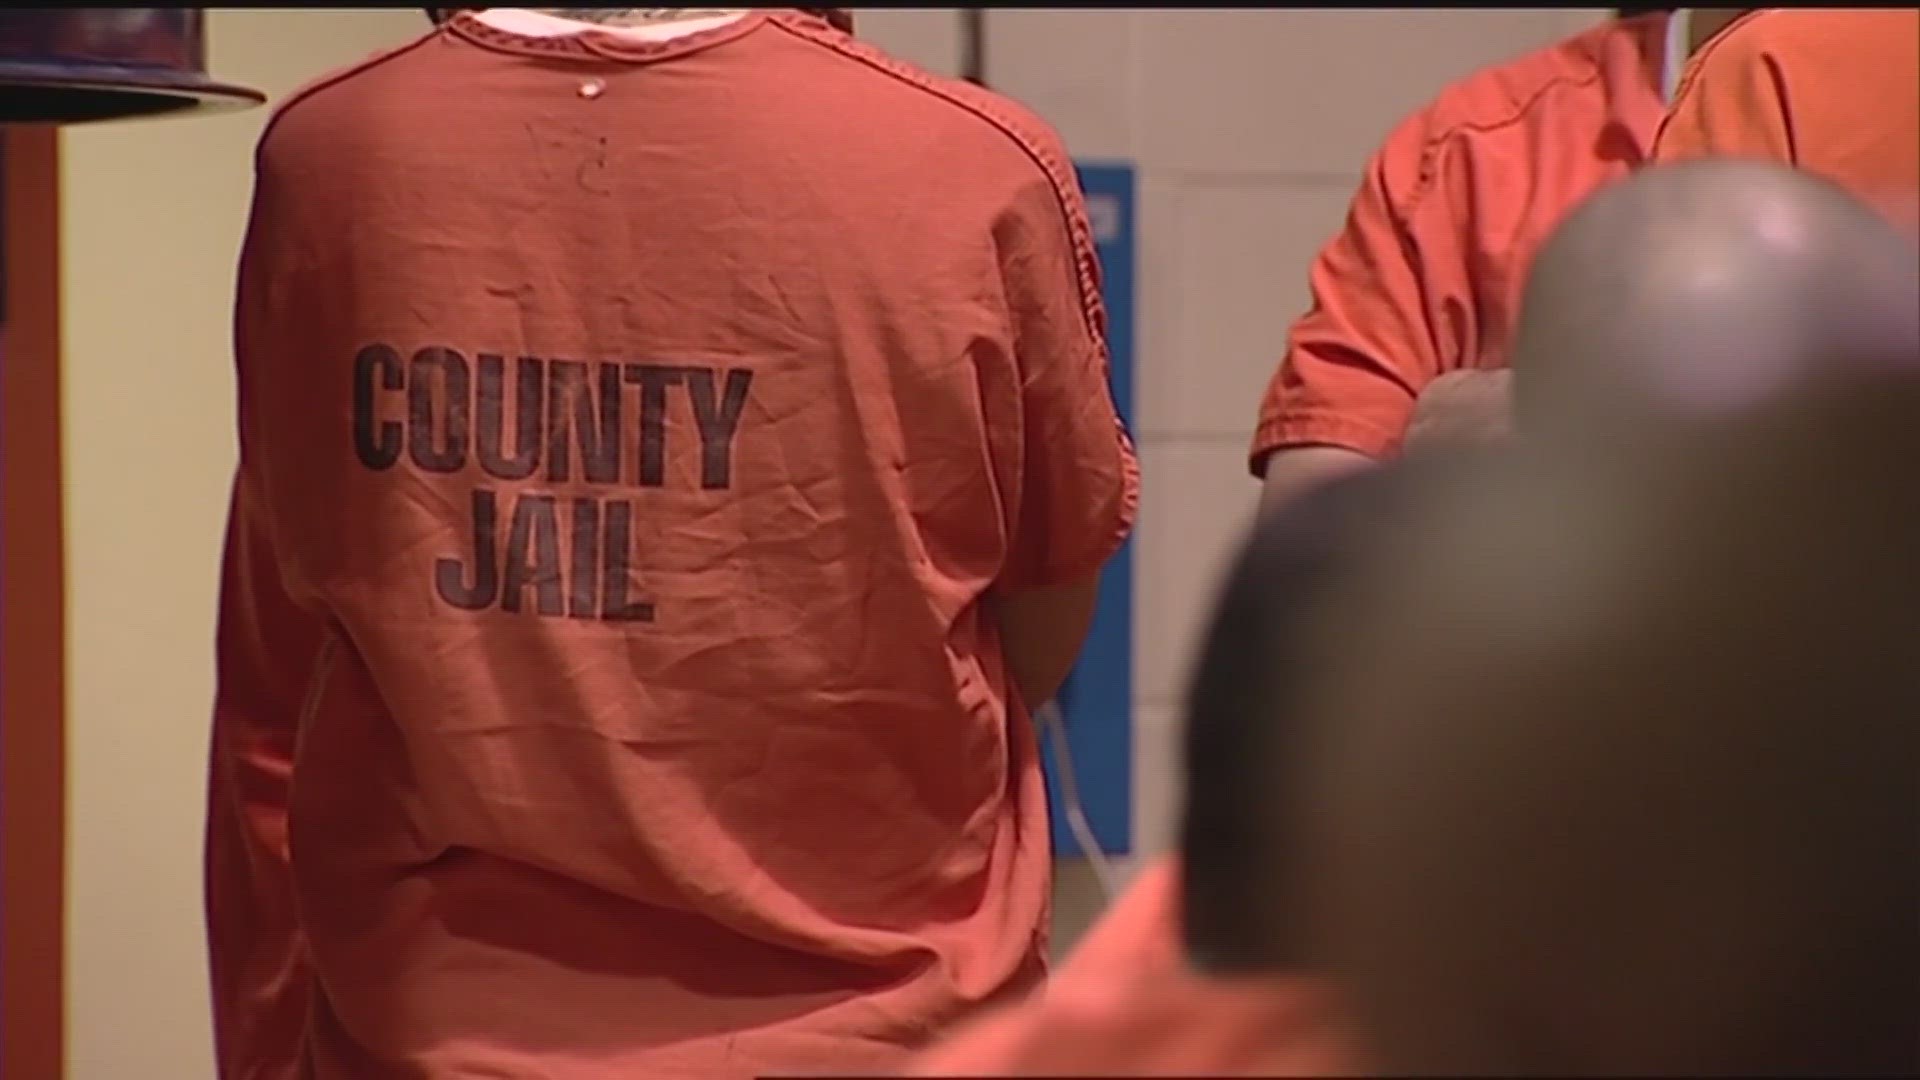 Inmates waiting in jail can’t get the mental health treatment they need to continue their court case. A new program will address that.